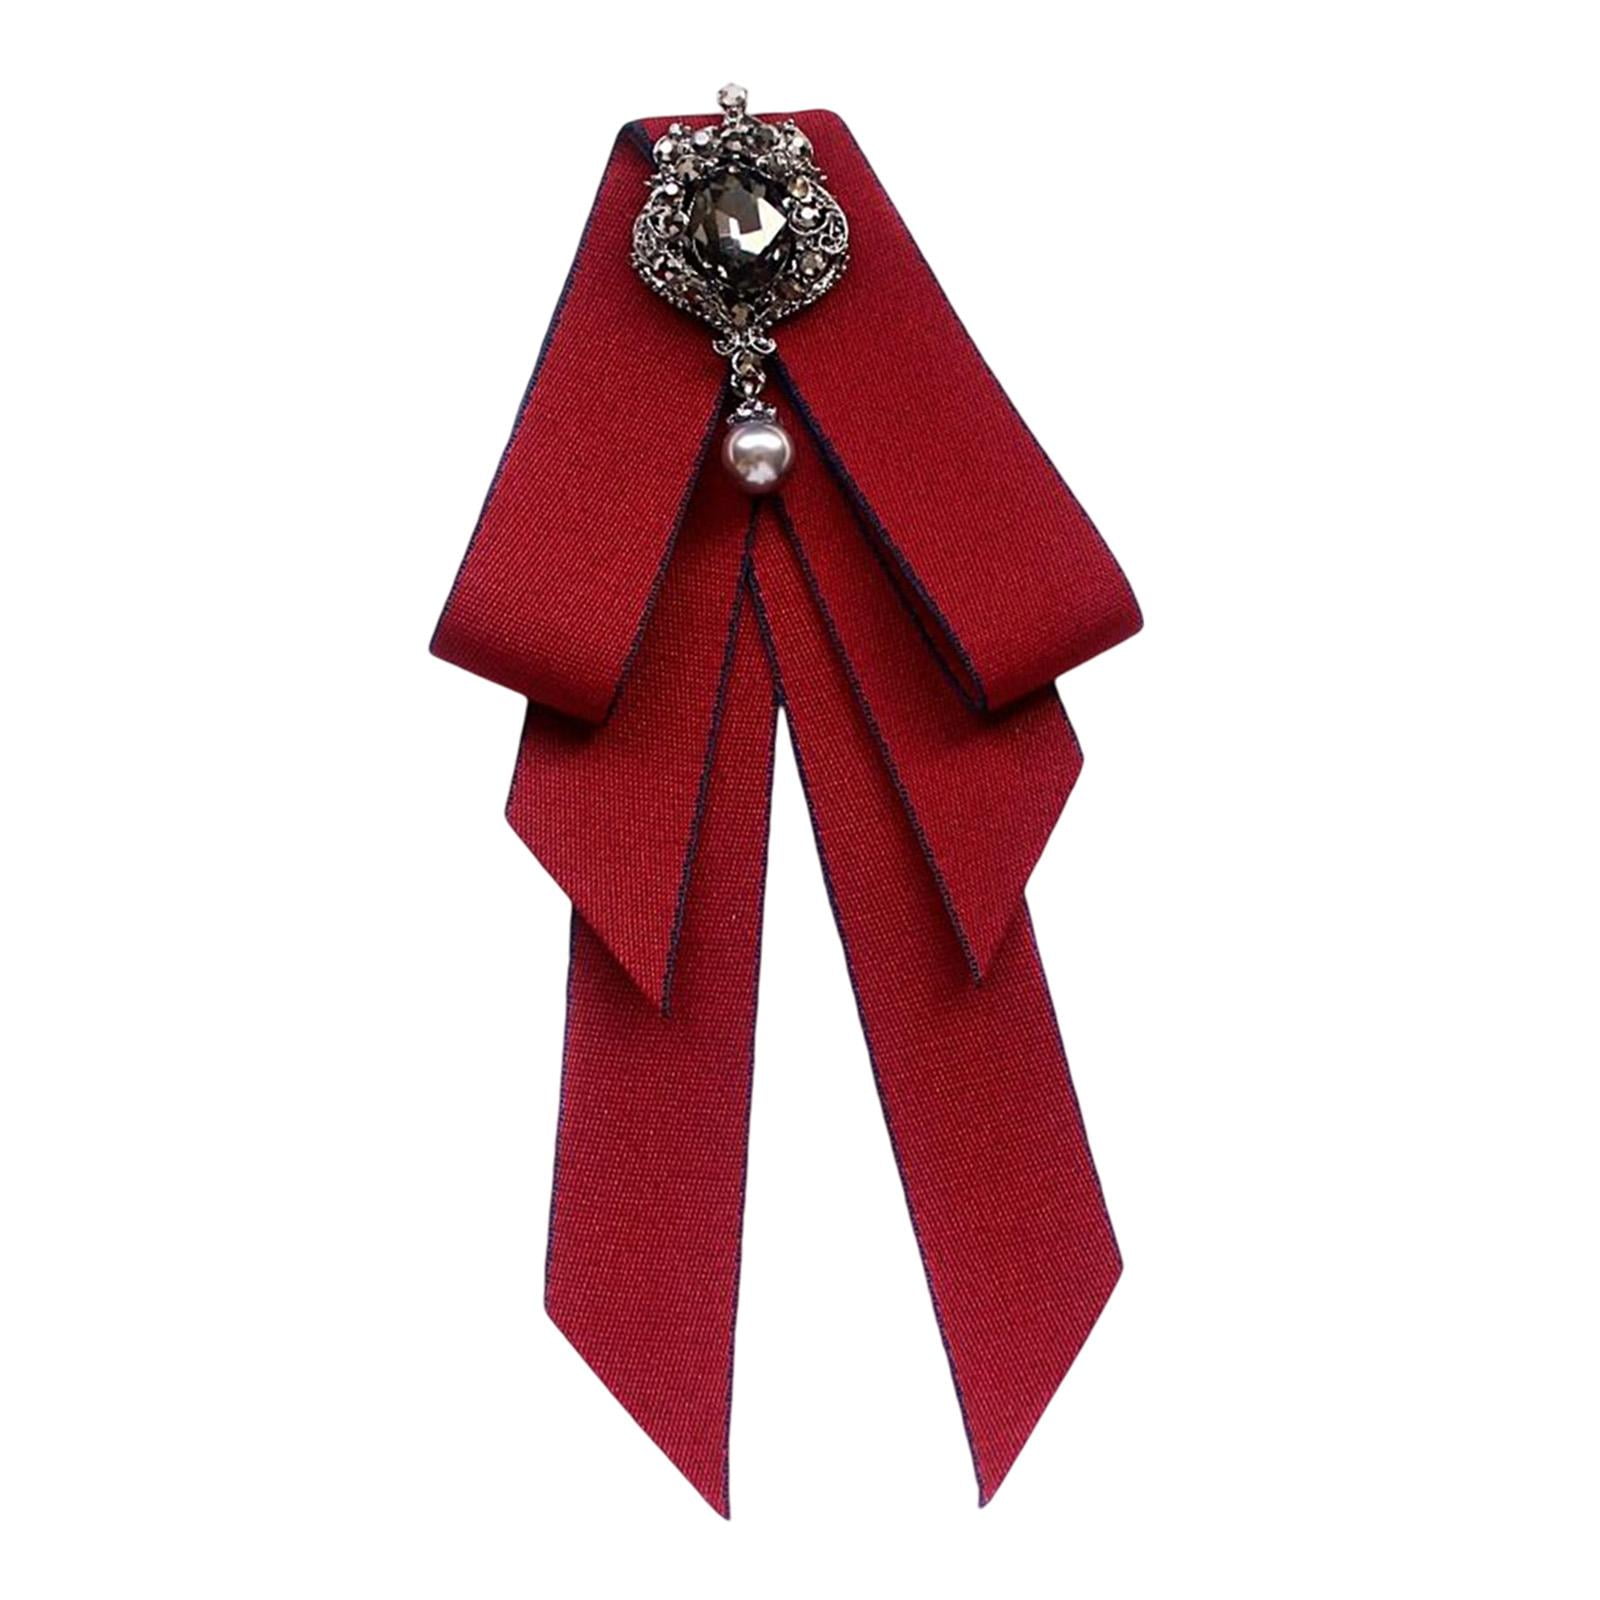 Bow Tie for Women Brooch Pin Rhinestone Girls Elegant Ribbon Fashion Collar  Jewelry Bowknot Necktie Bowties for Gift Suit Graduation Red 